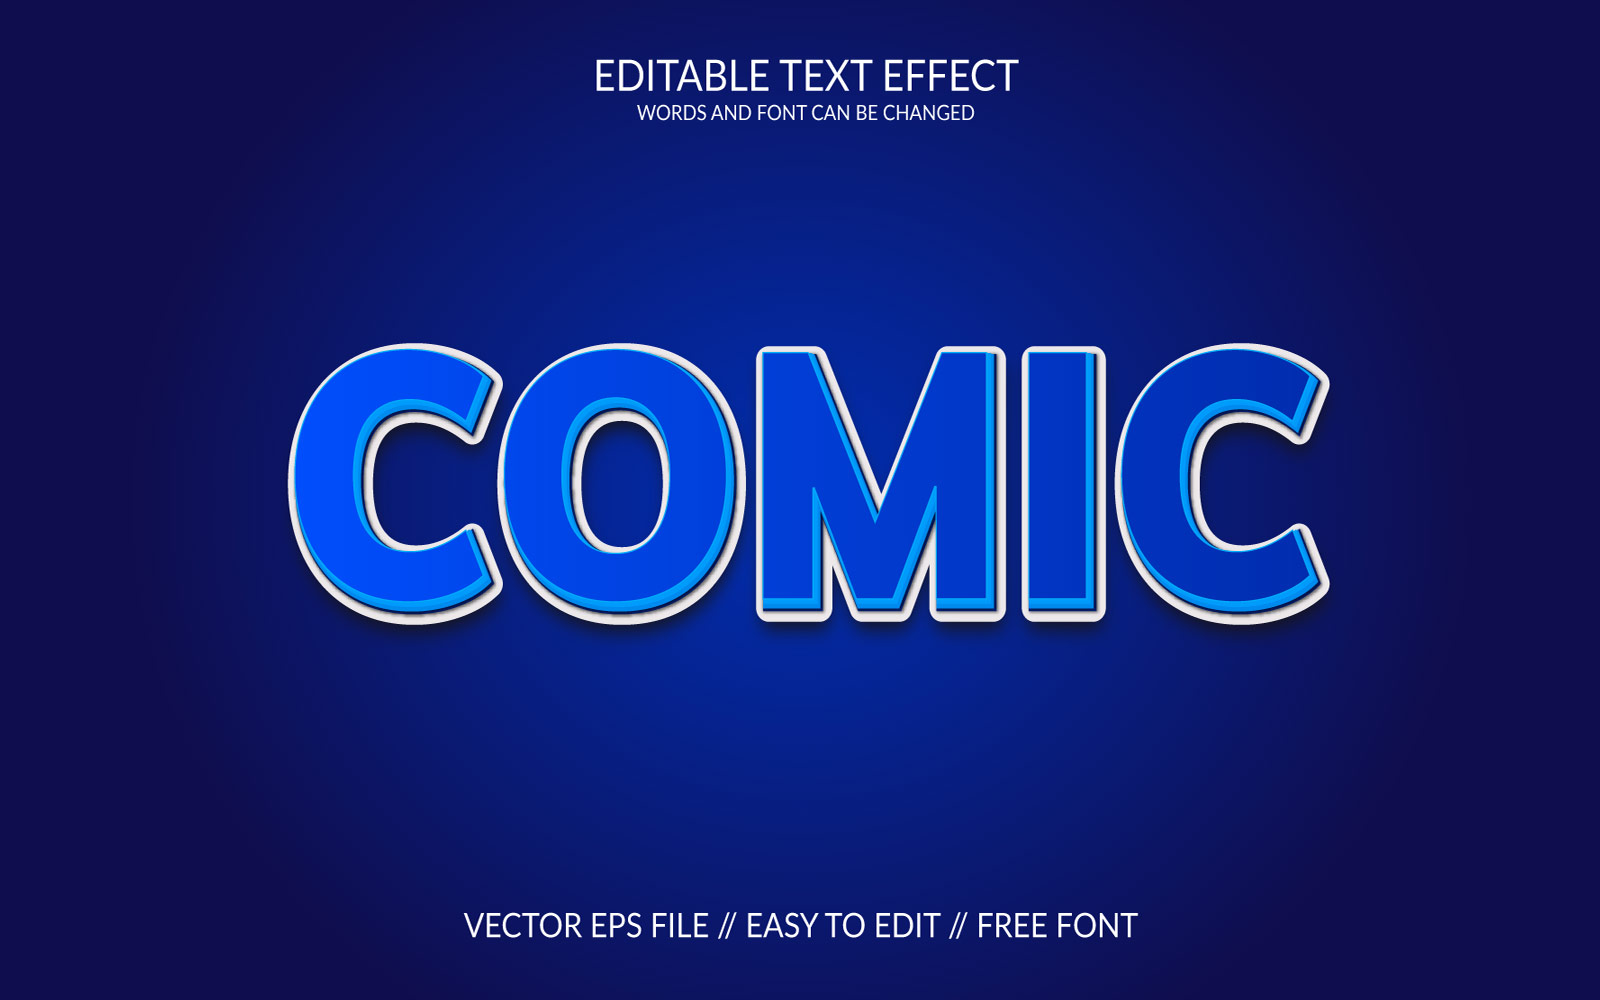 Comic fully editable text effect template illustration